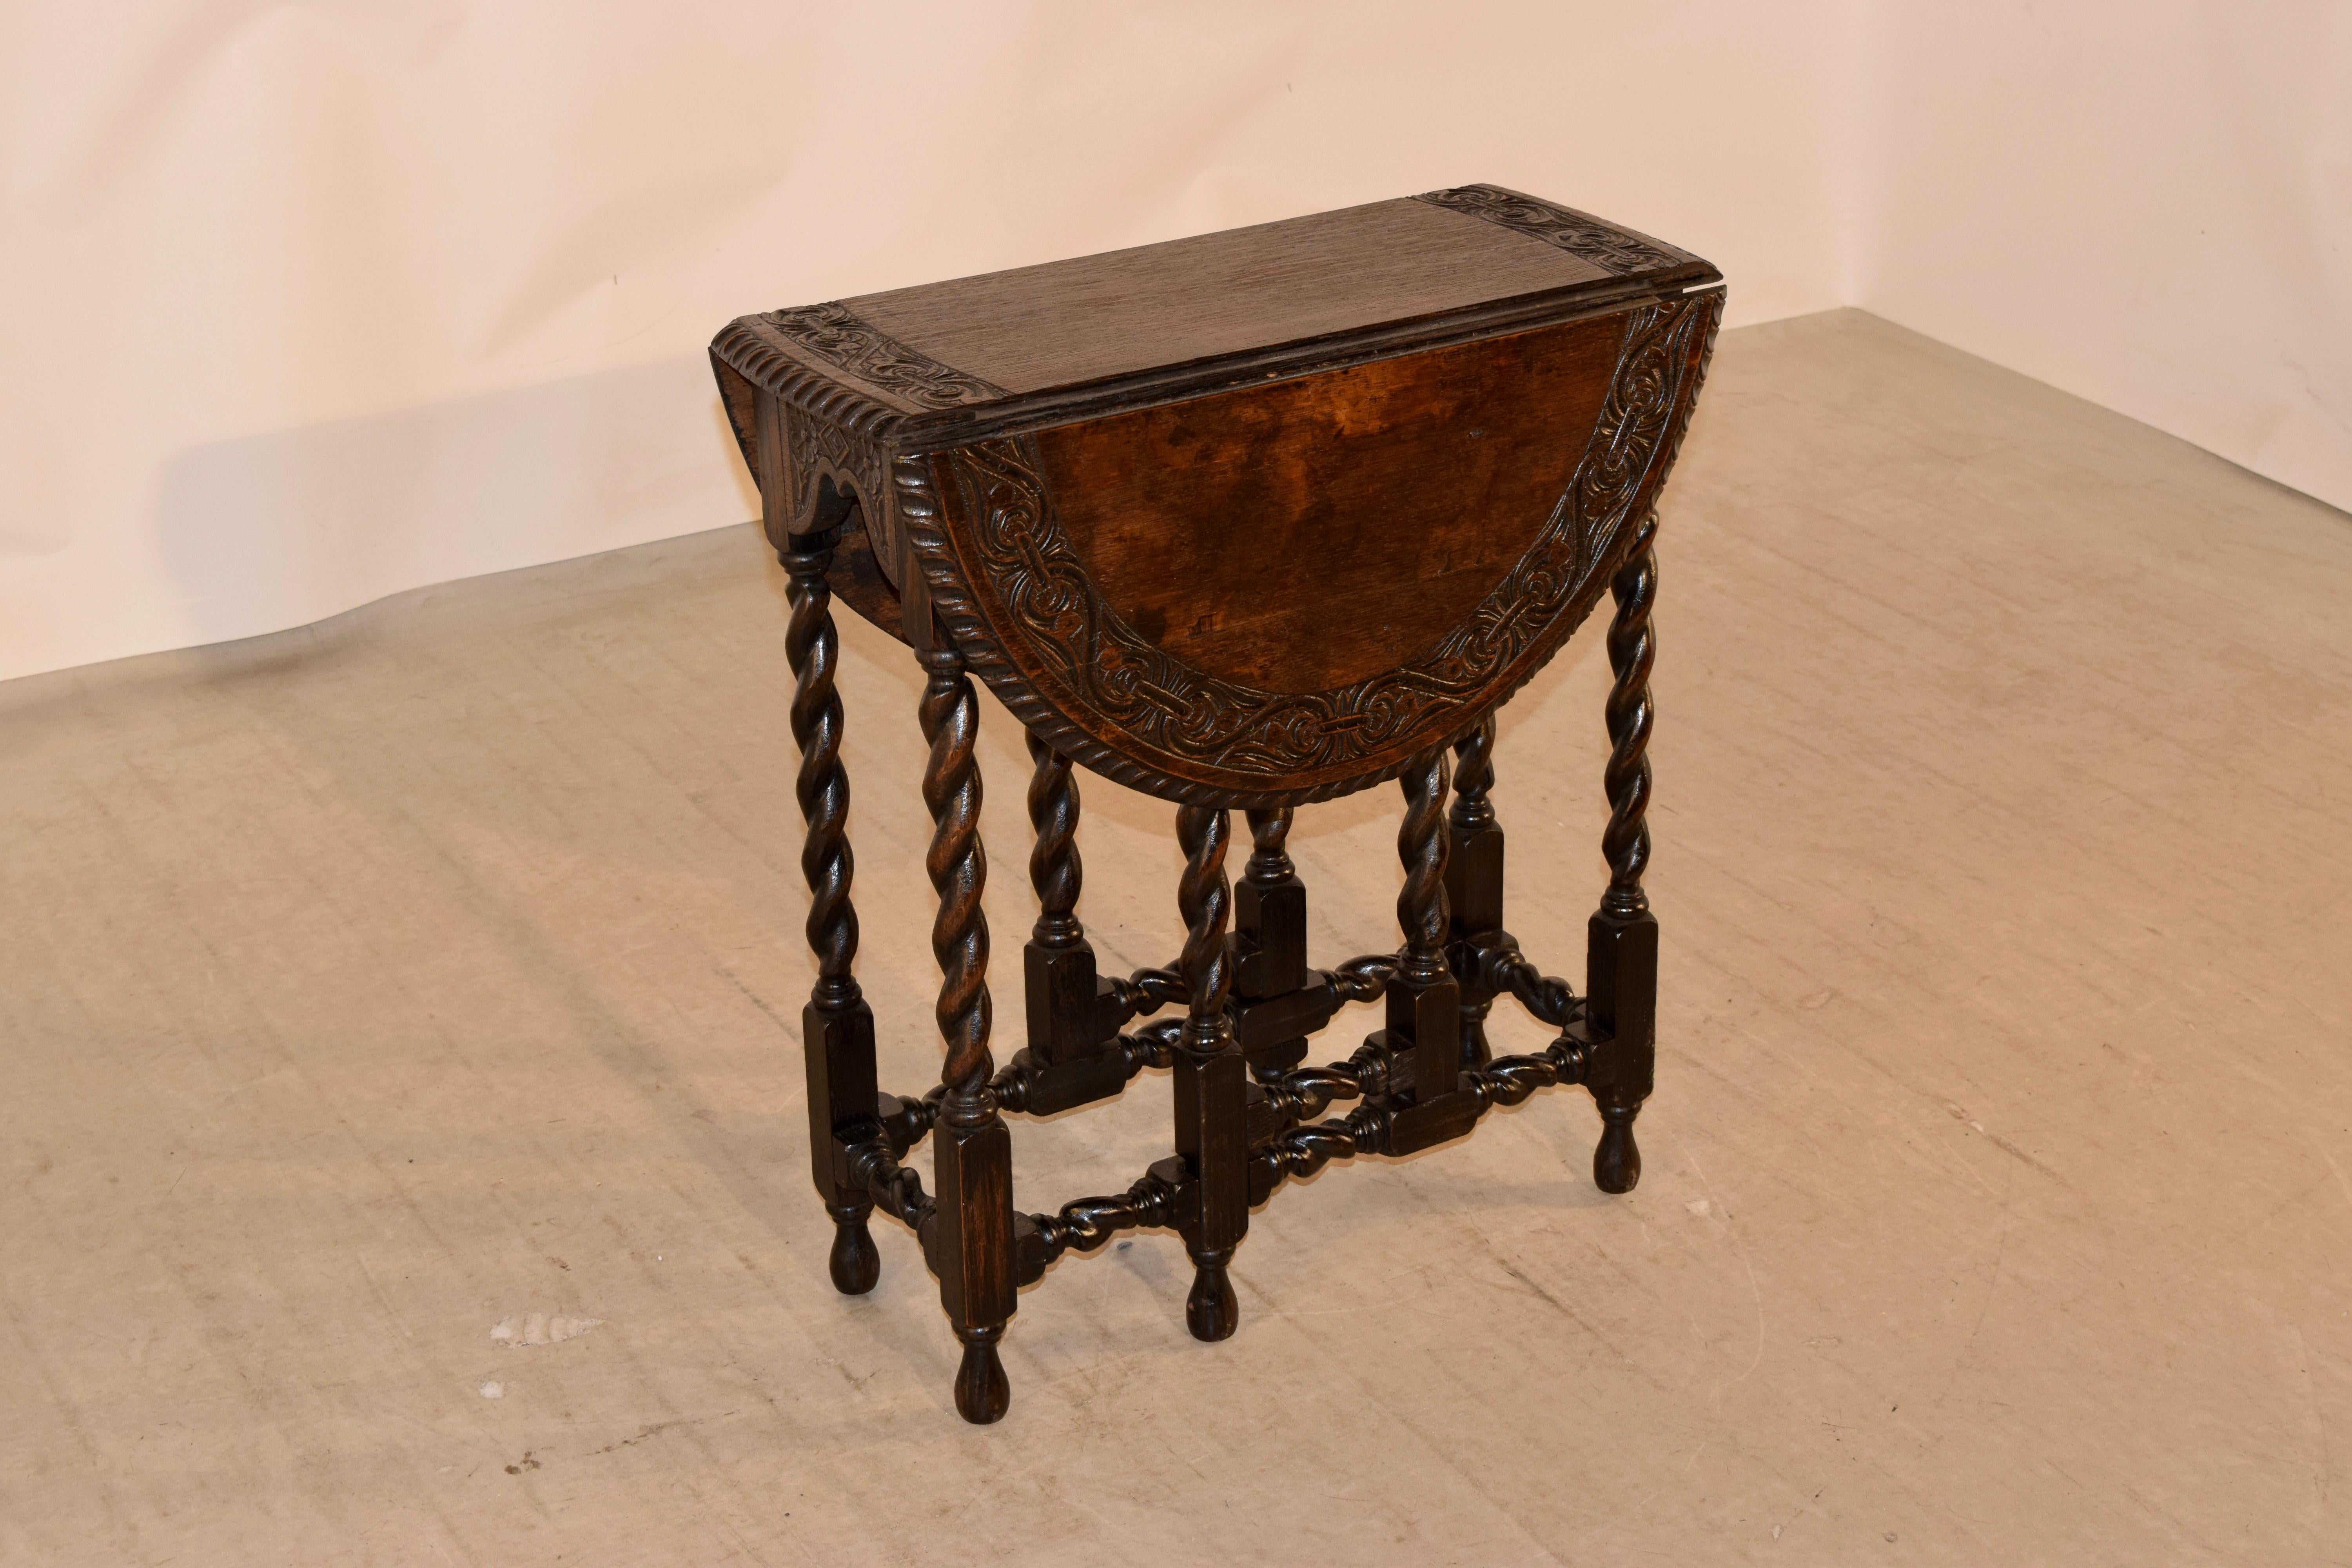 19th century oak gate leg table with a carved border around the top, which is surrounded by a deeply hand carved decorated beveled edge. This follows down to a hand carved and scalloped apron and hand turned barley twist legs and gates, all joined